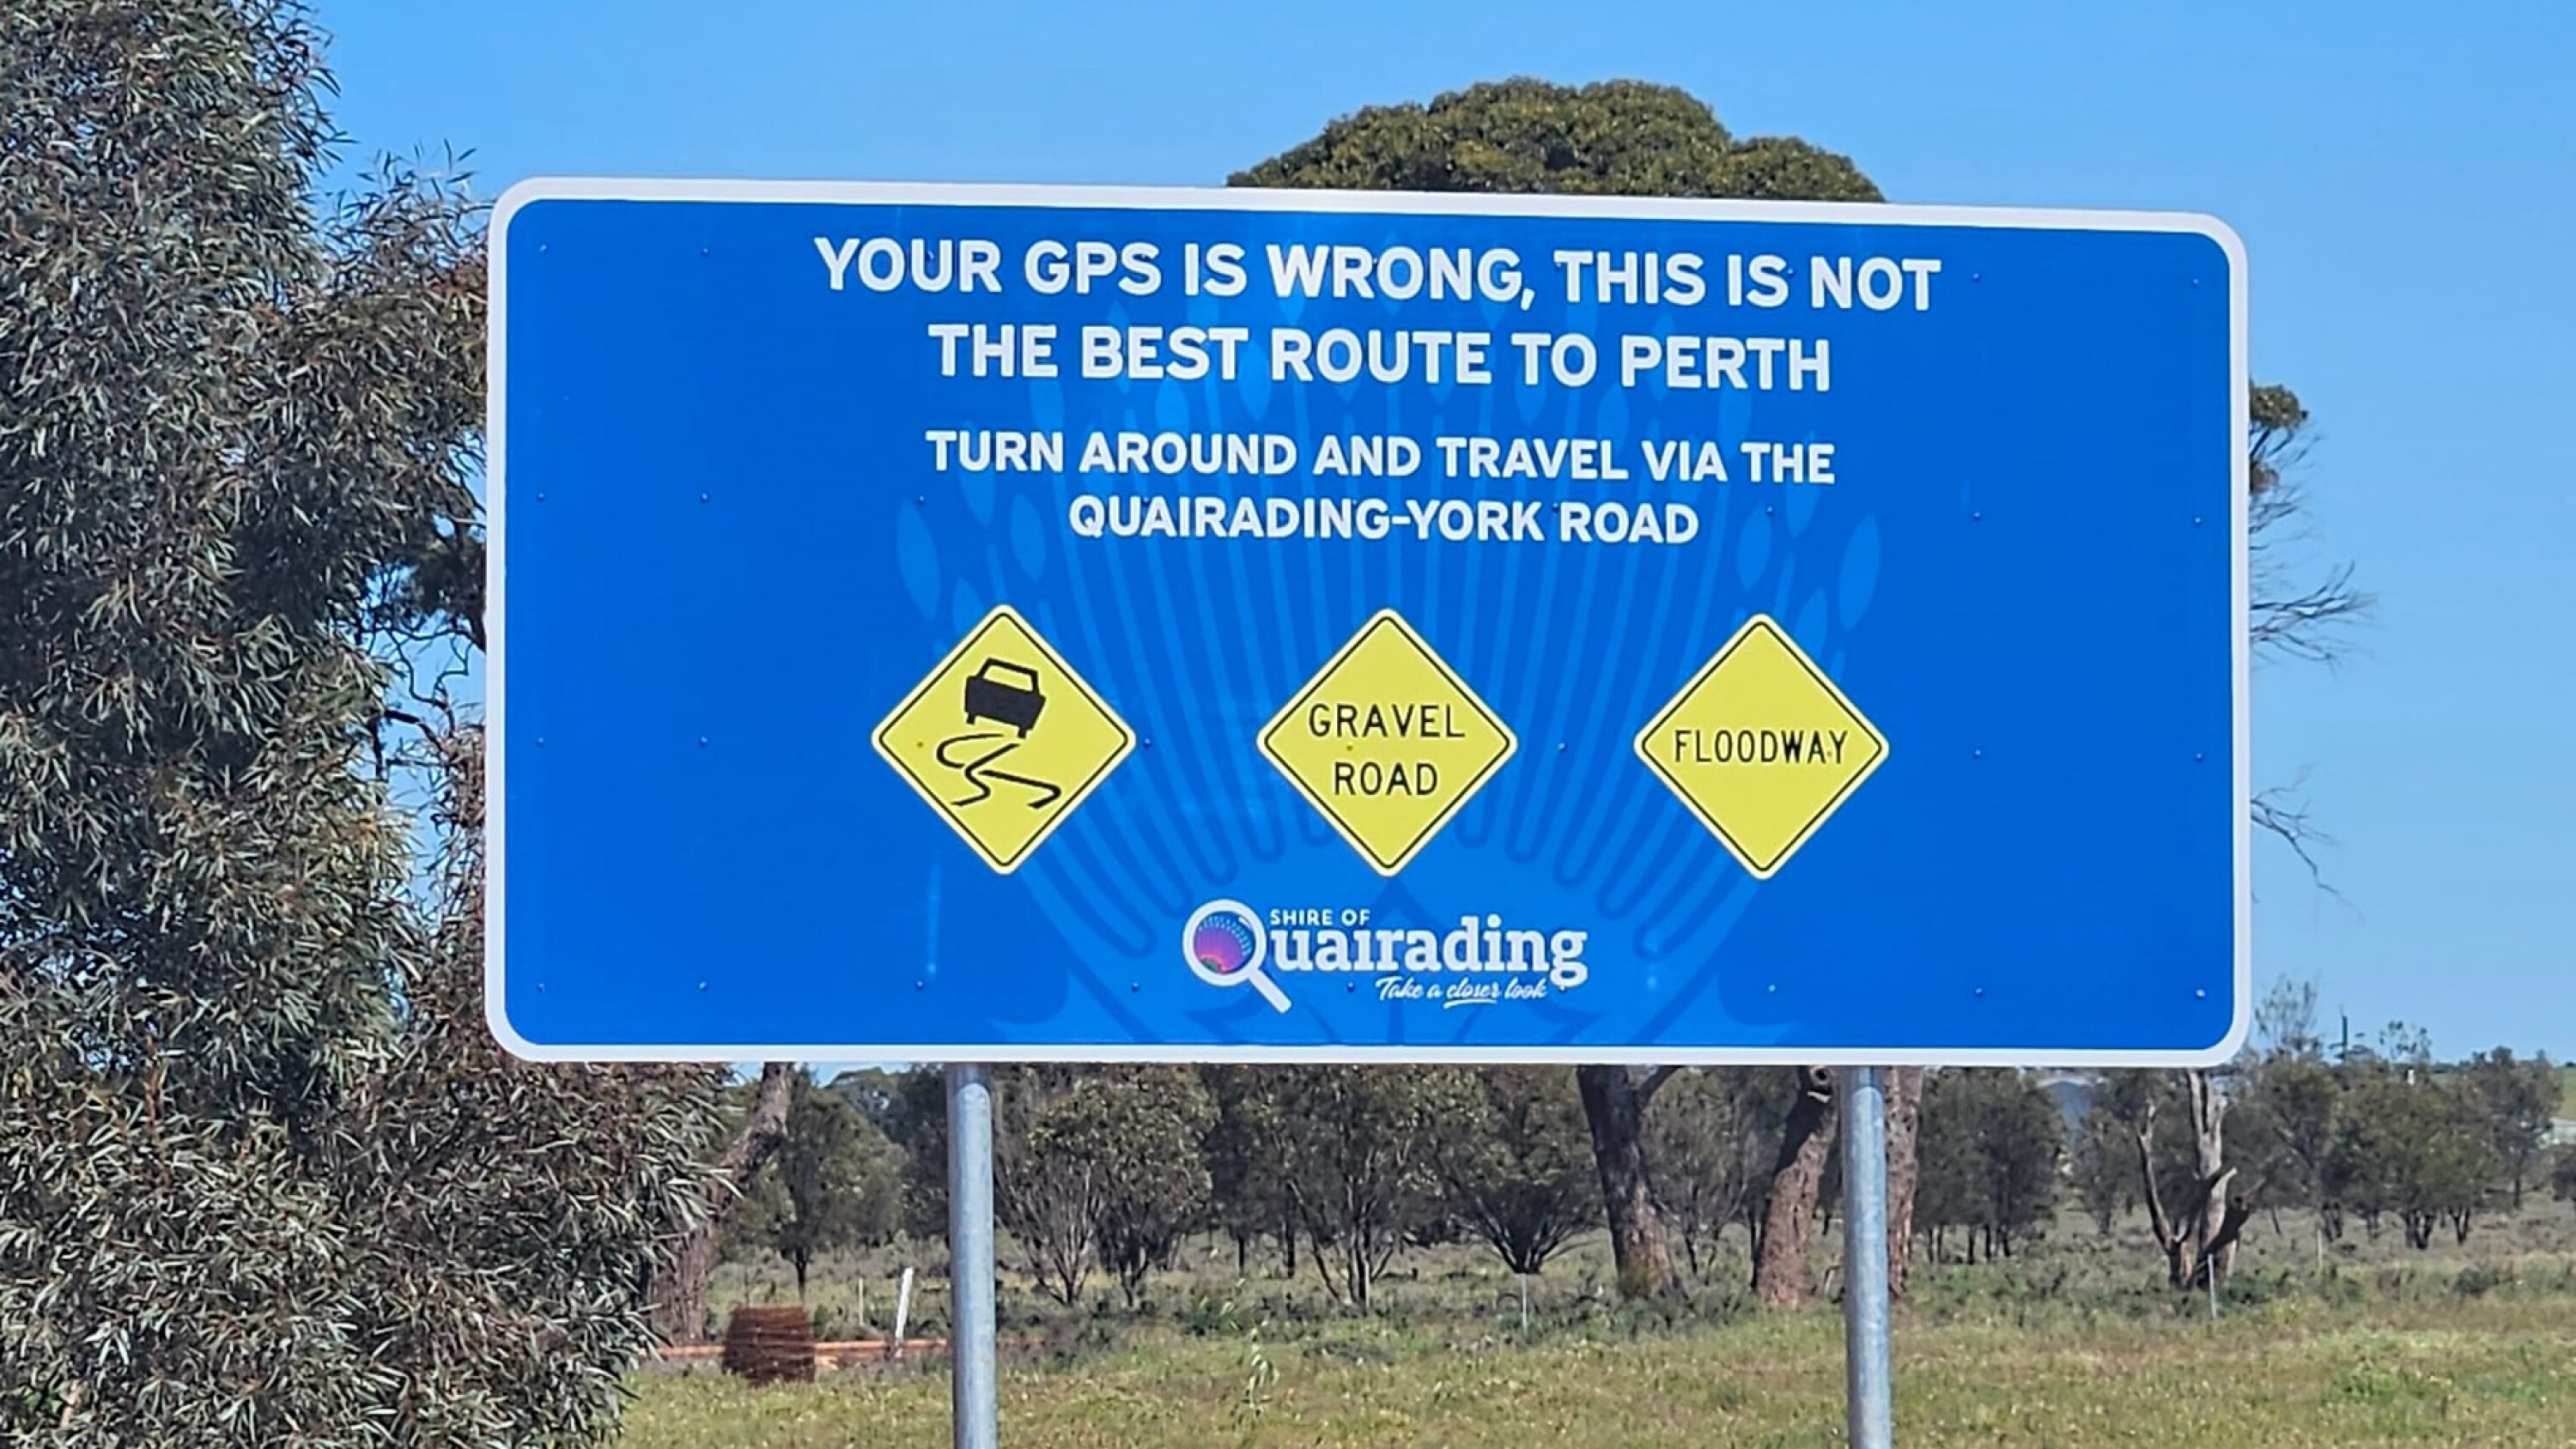 dc44159b/2024 your gps is wrong sign road sign jpg